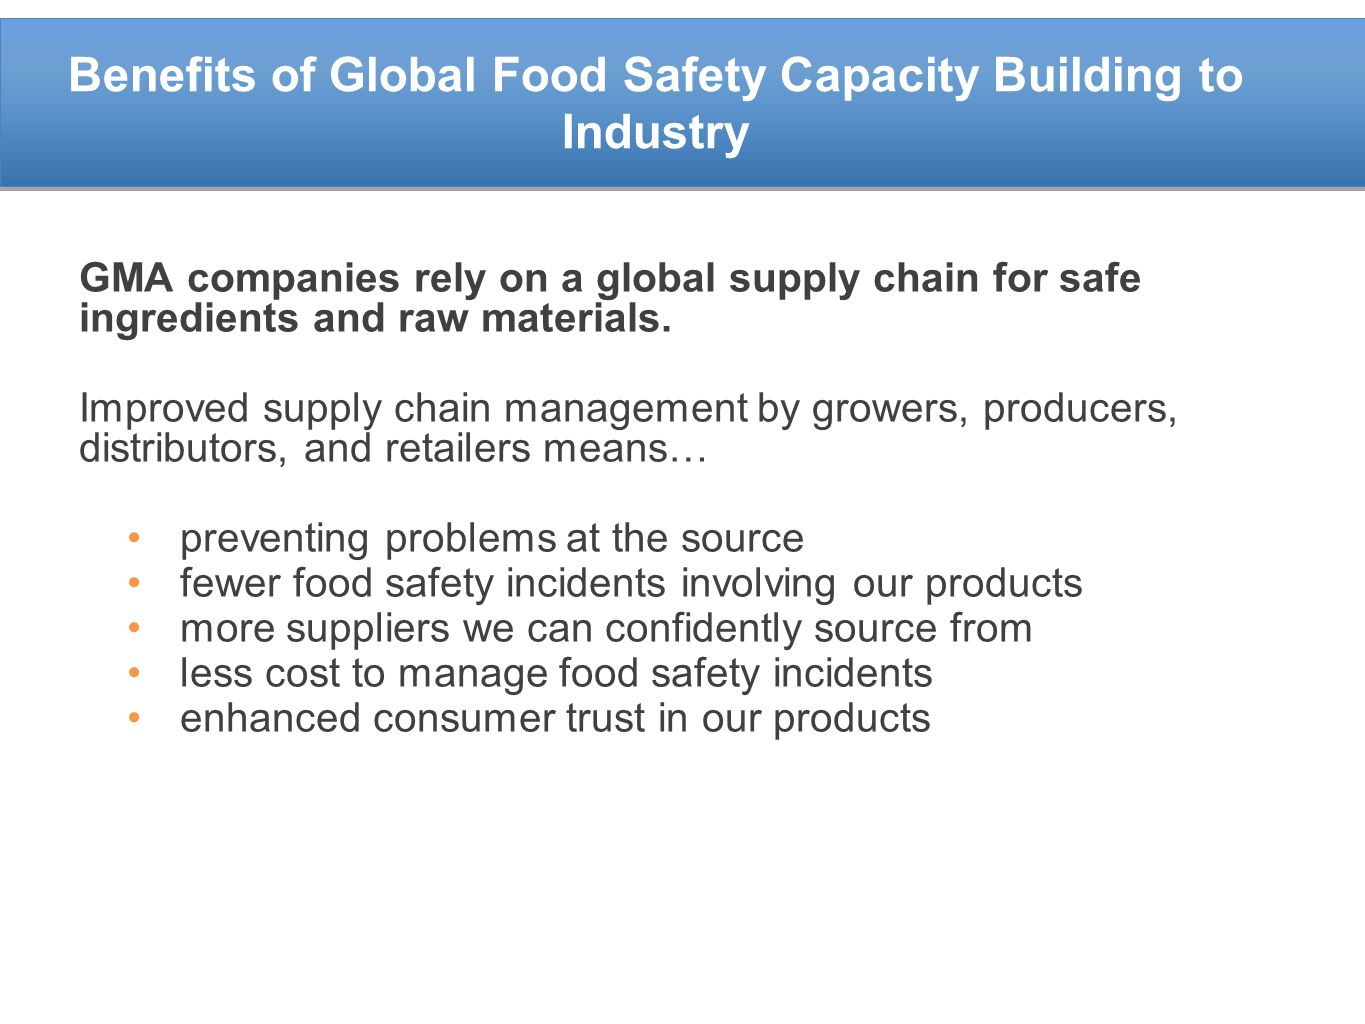 Benefits of Global Food Safety Capacity Building to Industry